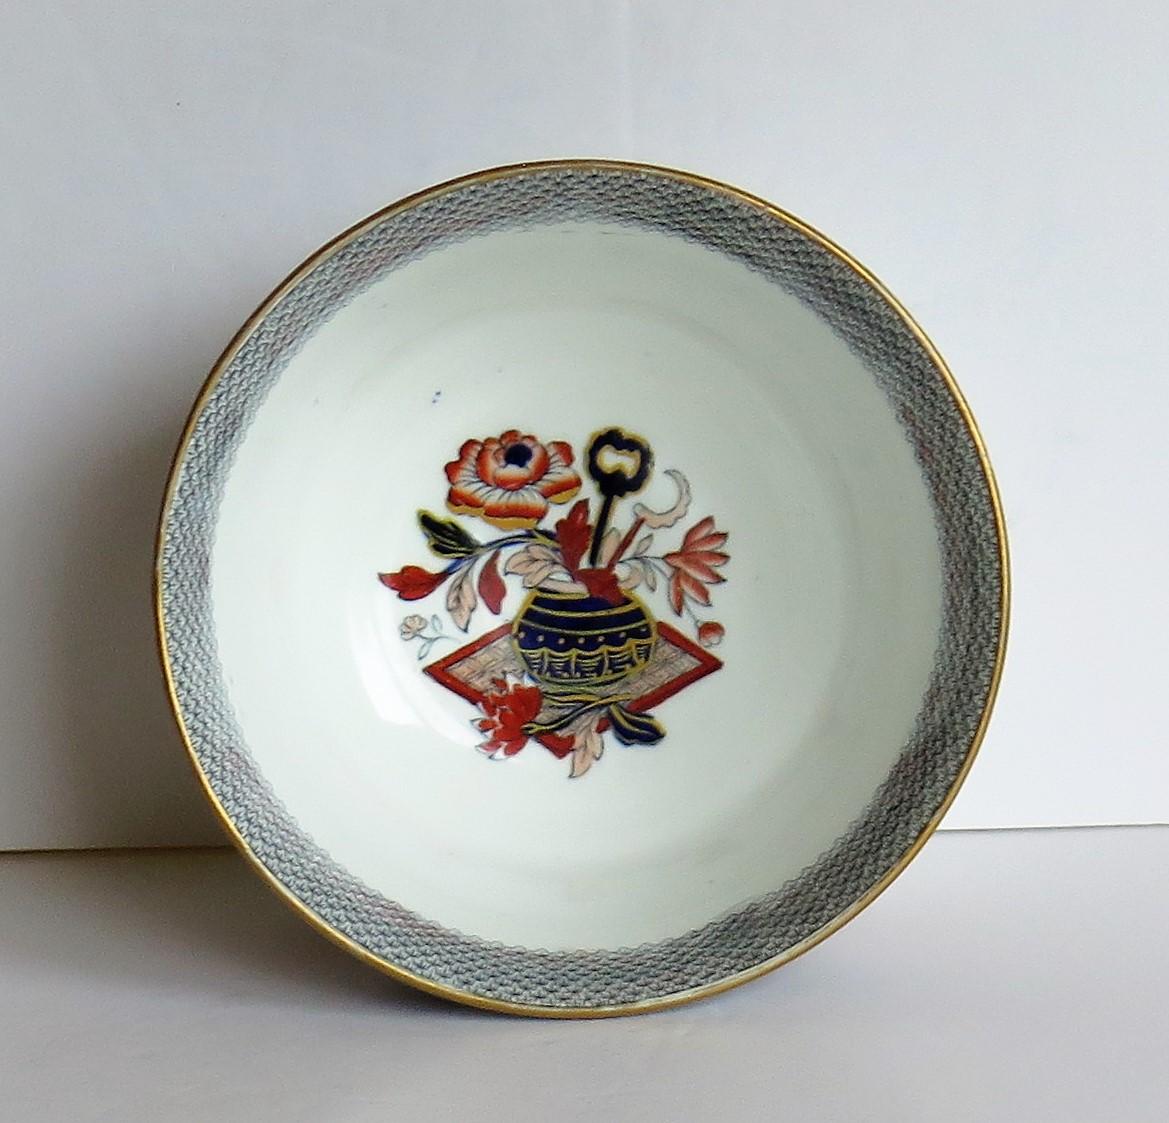 This is a good porcelain deep bowl with a bold pattern number 2829 made by Davenport & Co. of Longport, Staffordshire, England, circa 1860.

The bowl is well potted with a slightly everted rim and sits on a low foot. It has an under-glaze